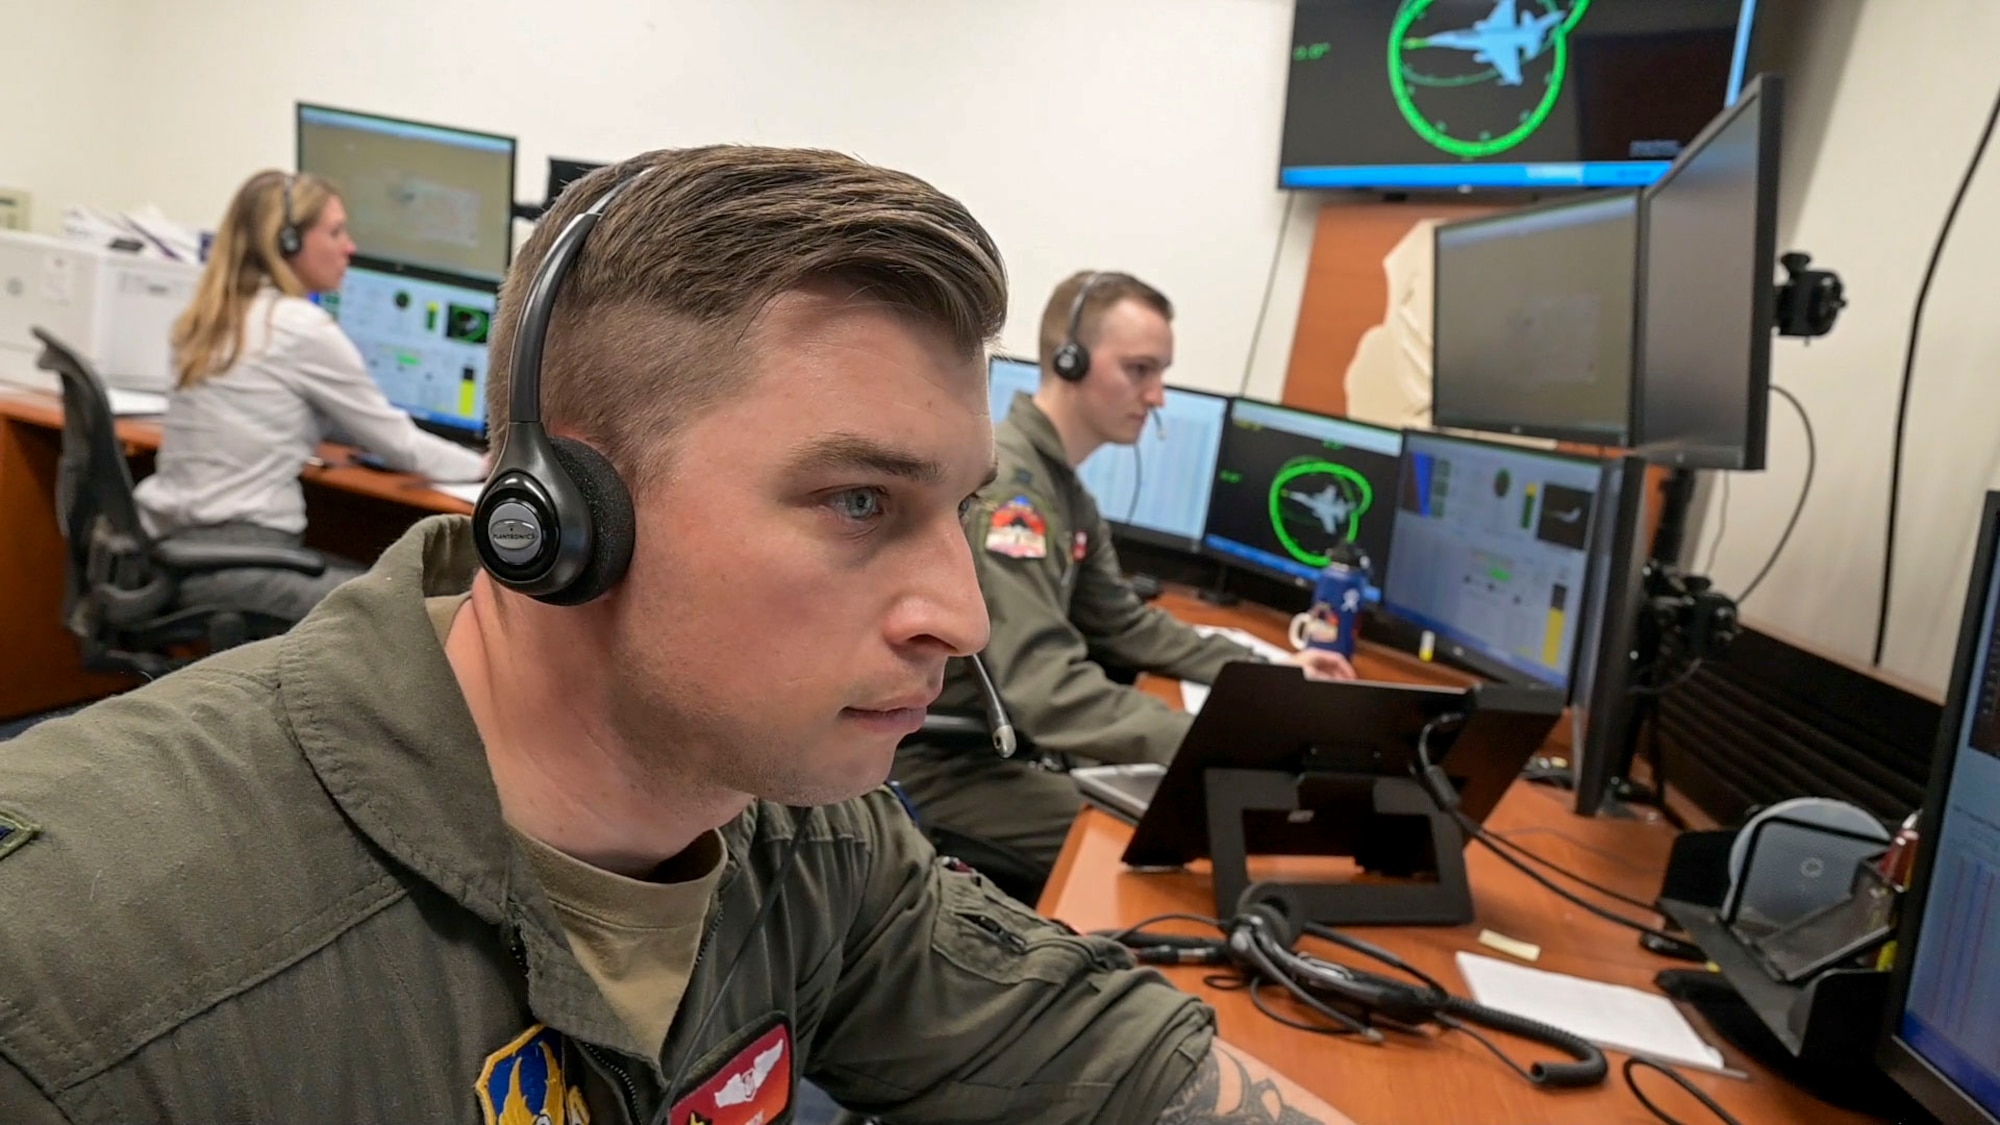 Capt. Bobby Torick, Student, USAF Test Pilot School reads flight data in a control room at USAF Test Pilot School. The F-16 High Angle-of-Attack event, conducted around the 8th month of USAF TPS, is an event where the students design, rehearse and execute a plan that is representative of “real” flight test coordinating with the pilots.